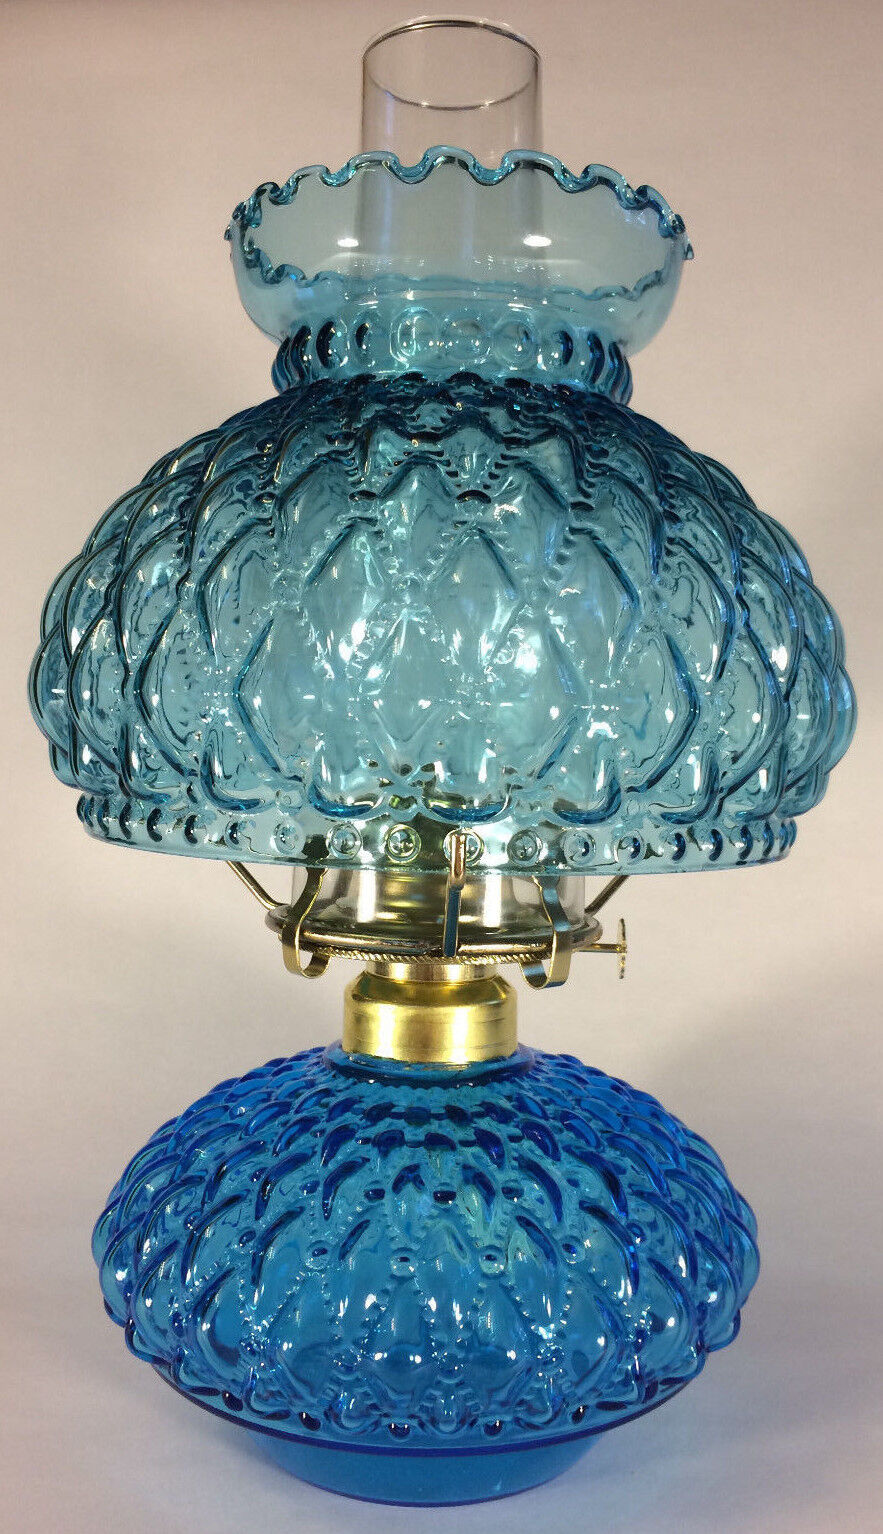 New Complete Light Blue Glass Diamond Quilted Oil Lamp With Shade,Chimney,Burner